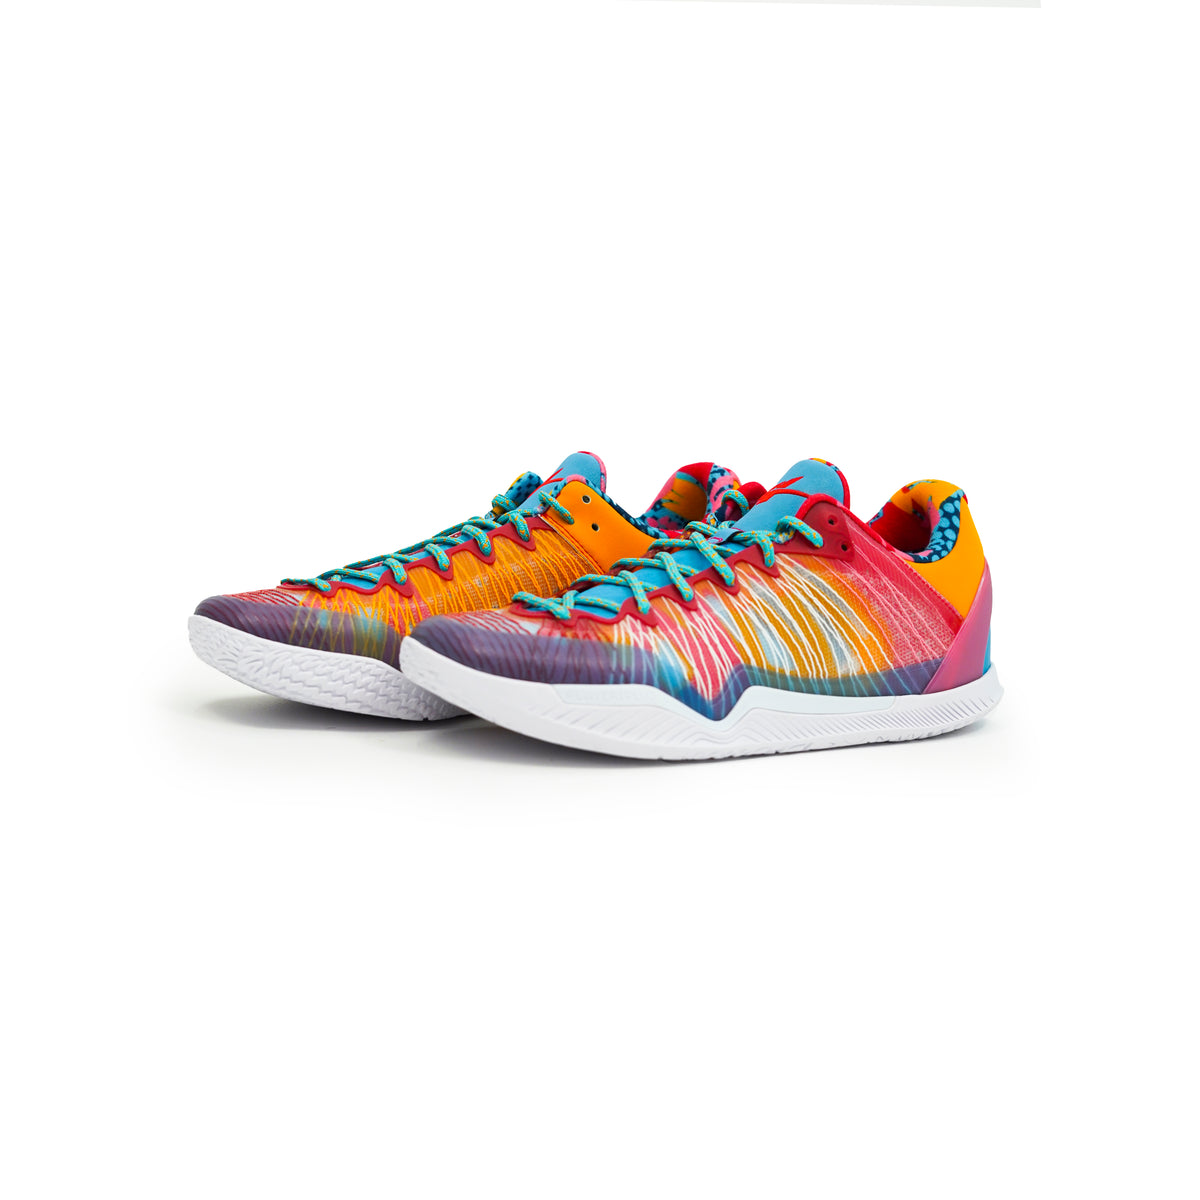 Player1 Plus Super Light Low Top Basketball Shoes